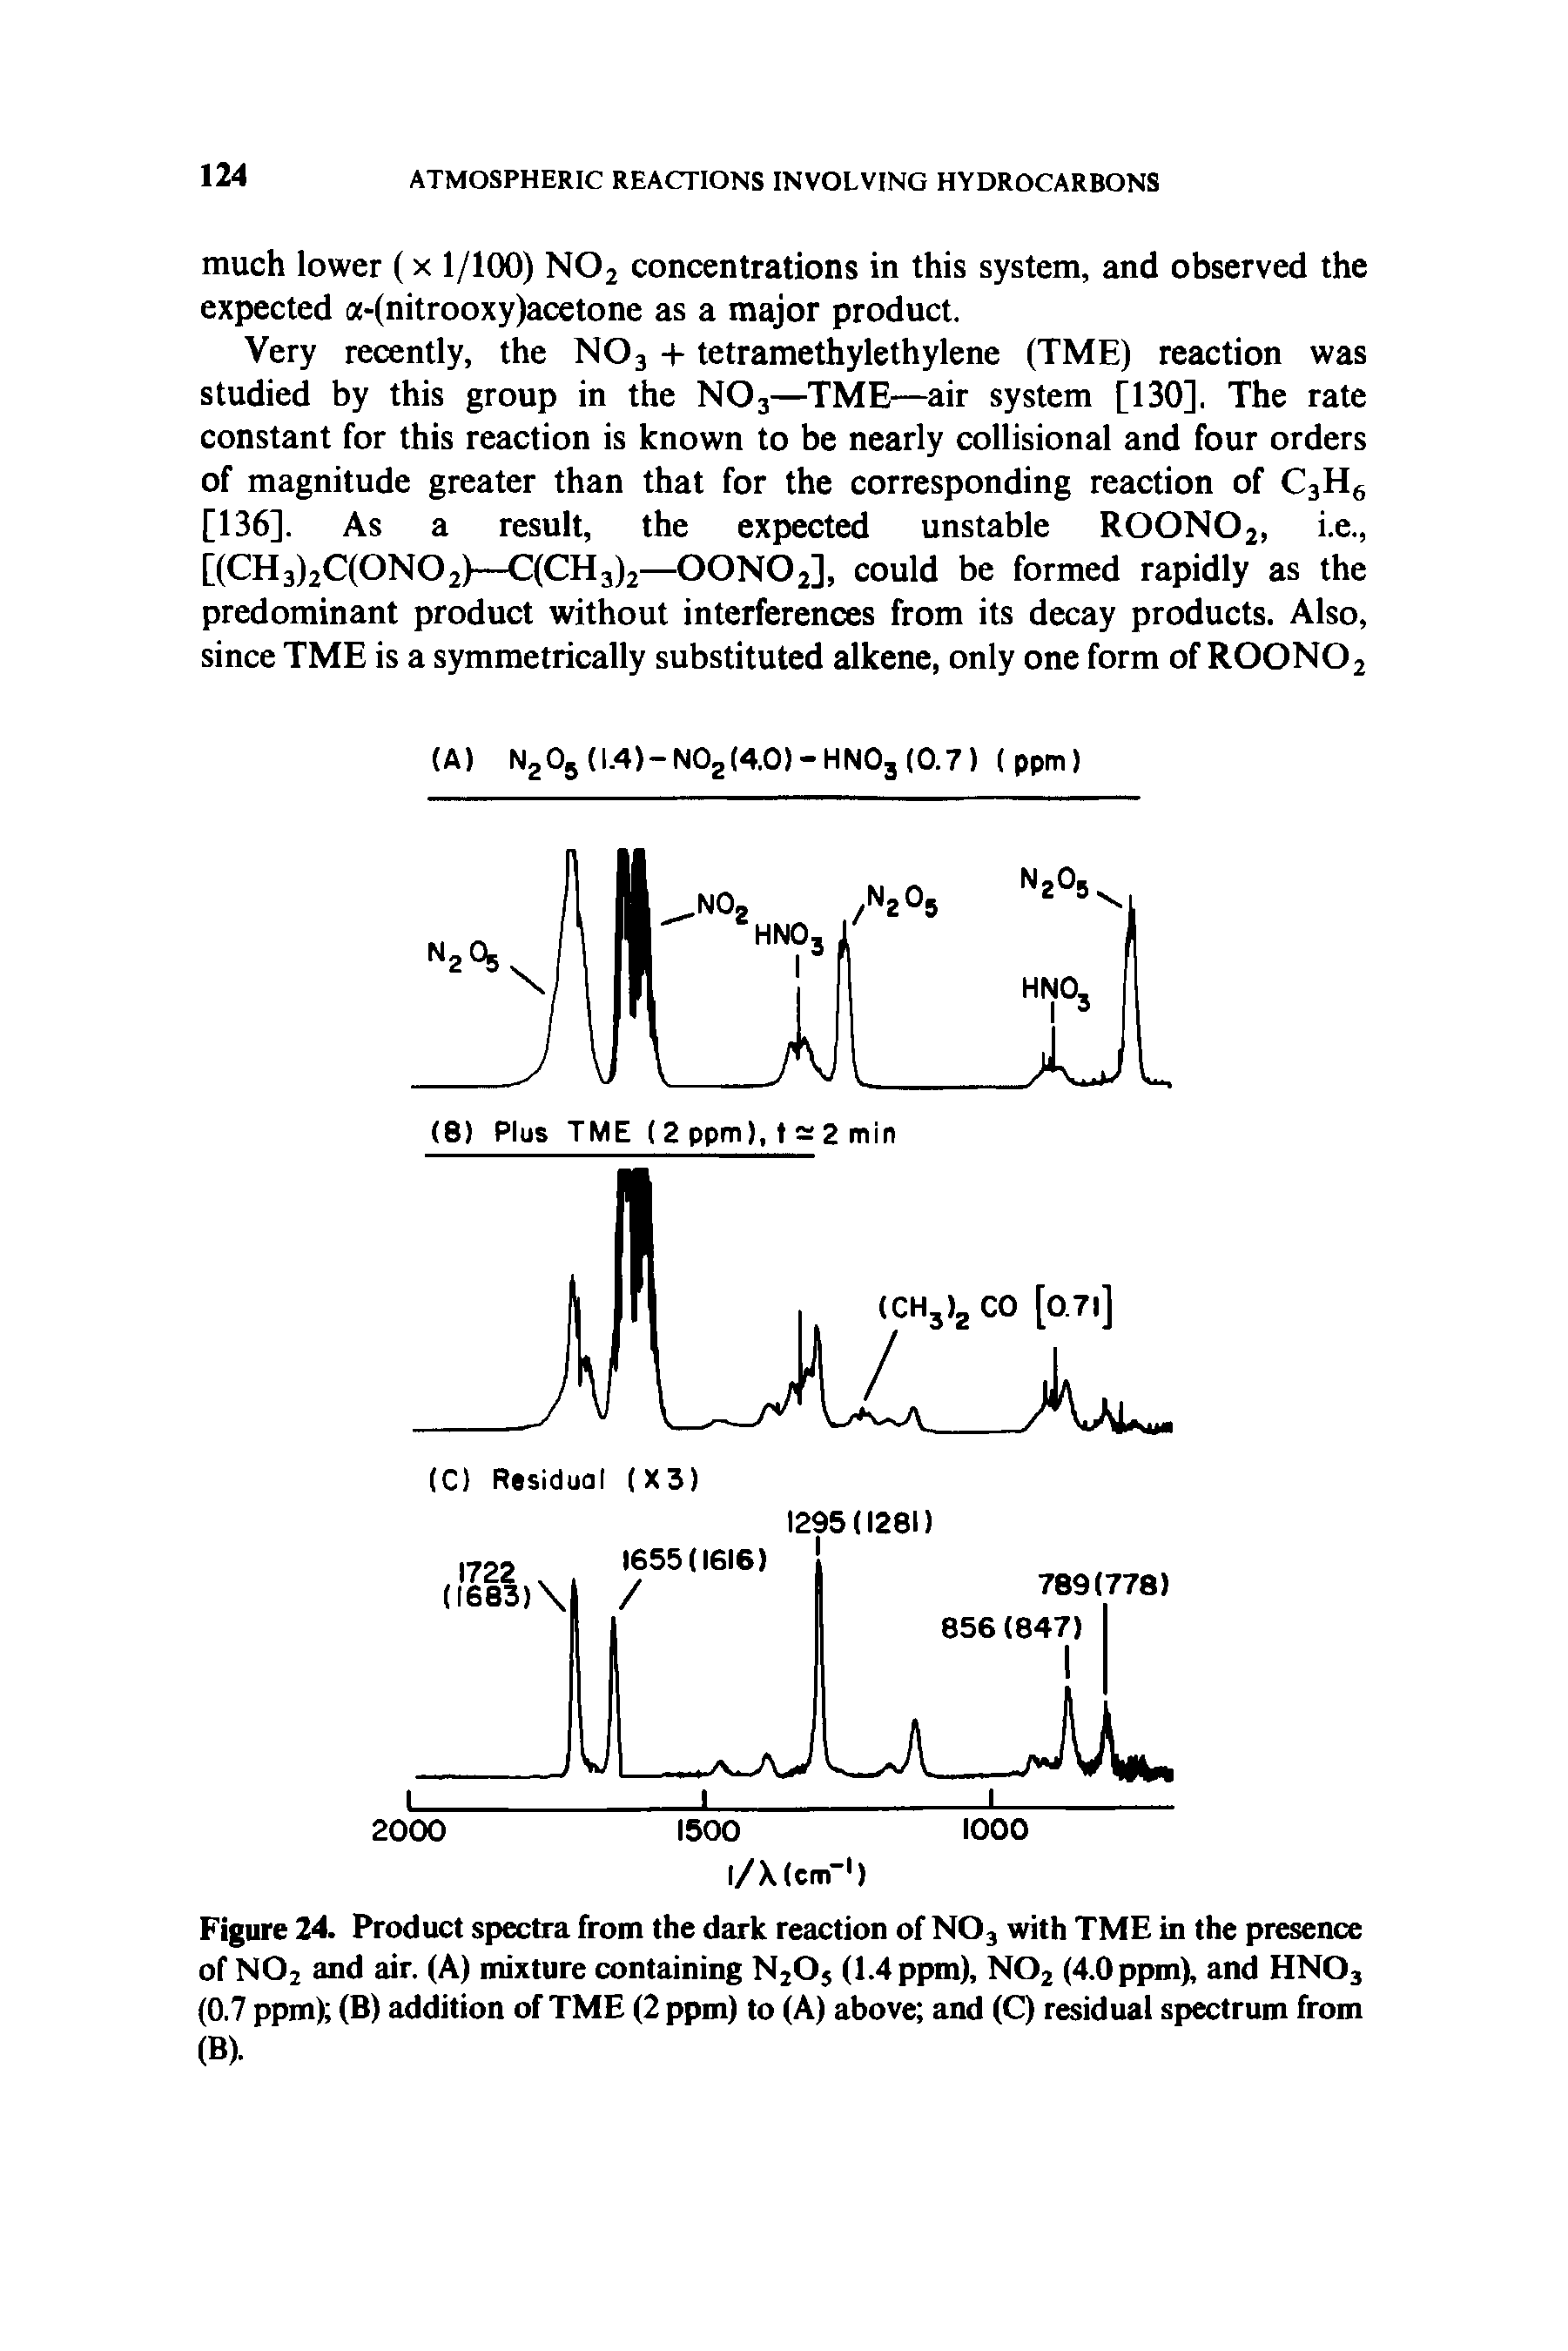 Figure 24. Product spectra from the dark reaction of N03 with TME in the presence of N02 and air. (A) mixture containing N2Os (1.4 ppm), N02 (4.0 ppm), and HN03 (0.7 ppm) (B) addition of TME (2 ppm) to (A) above and (C) residual spectrum from (B).